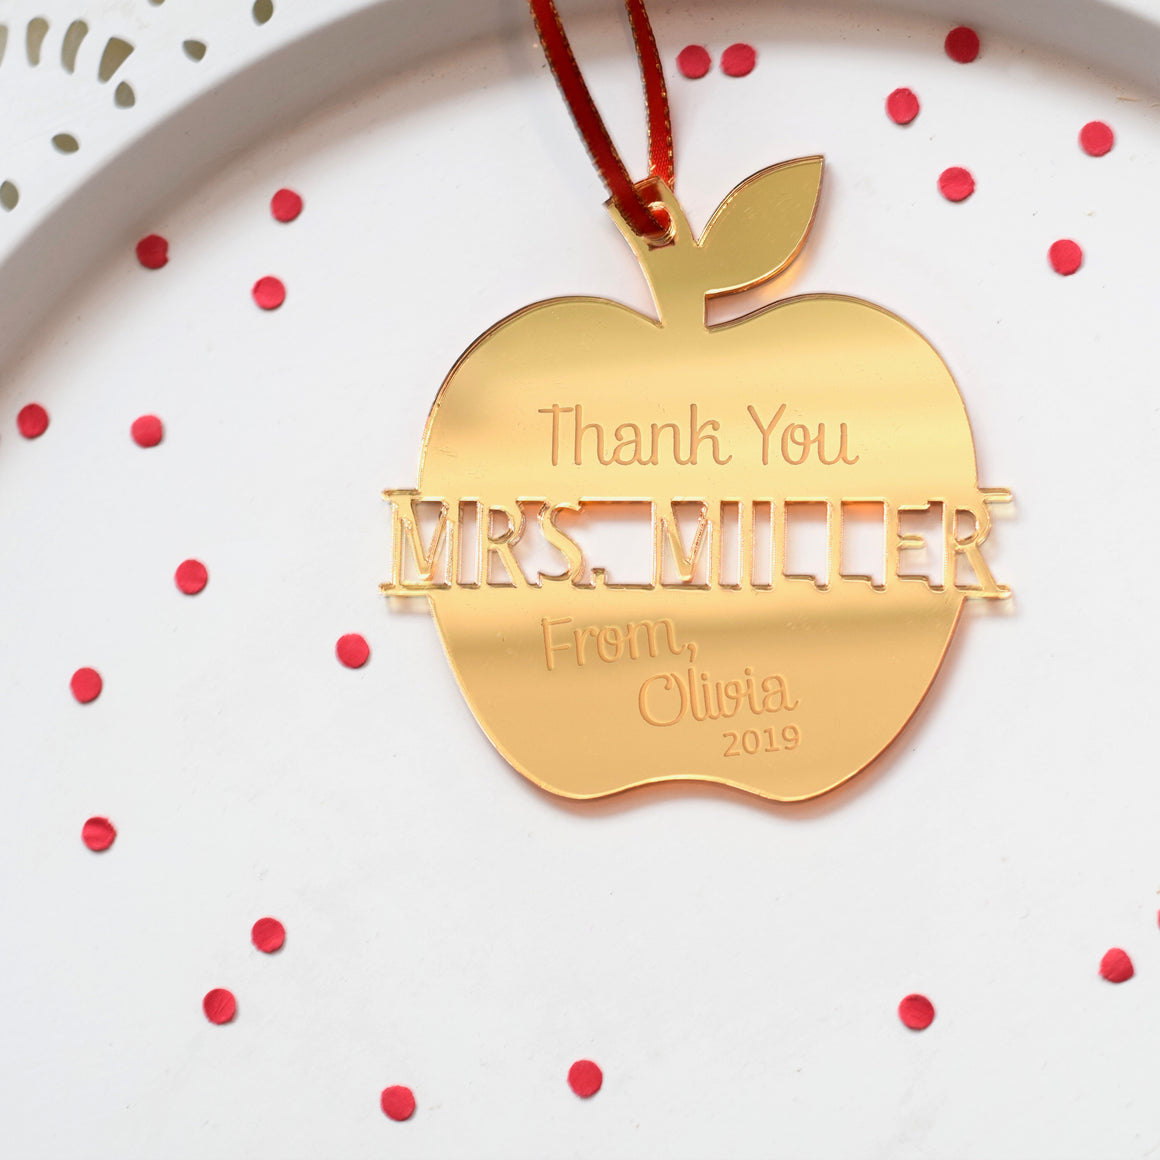 Personalized Christmas Ornament for Teacher Gift